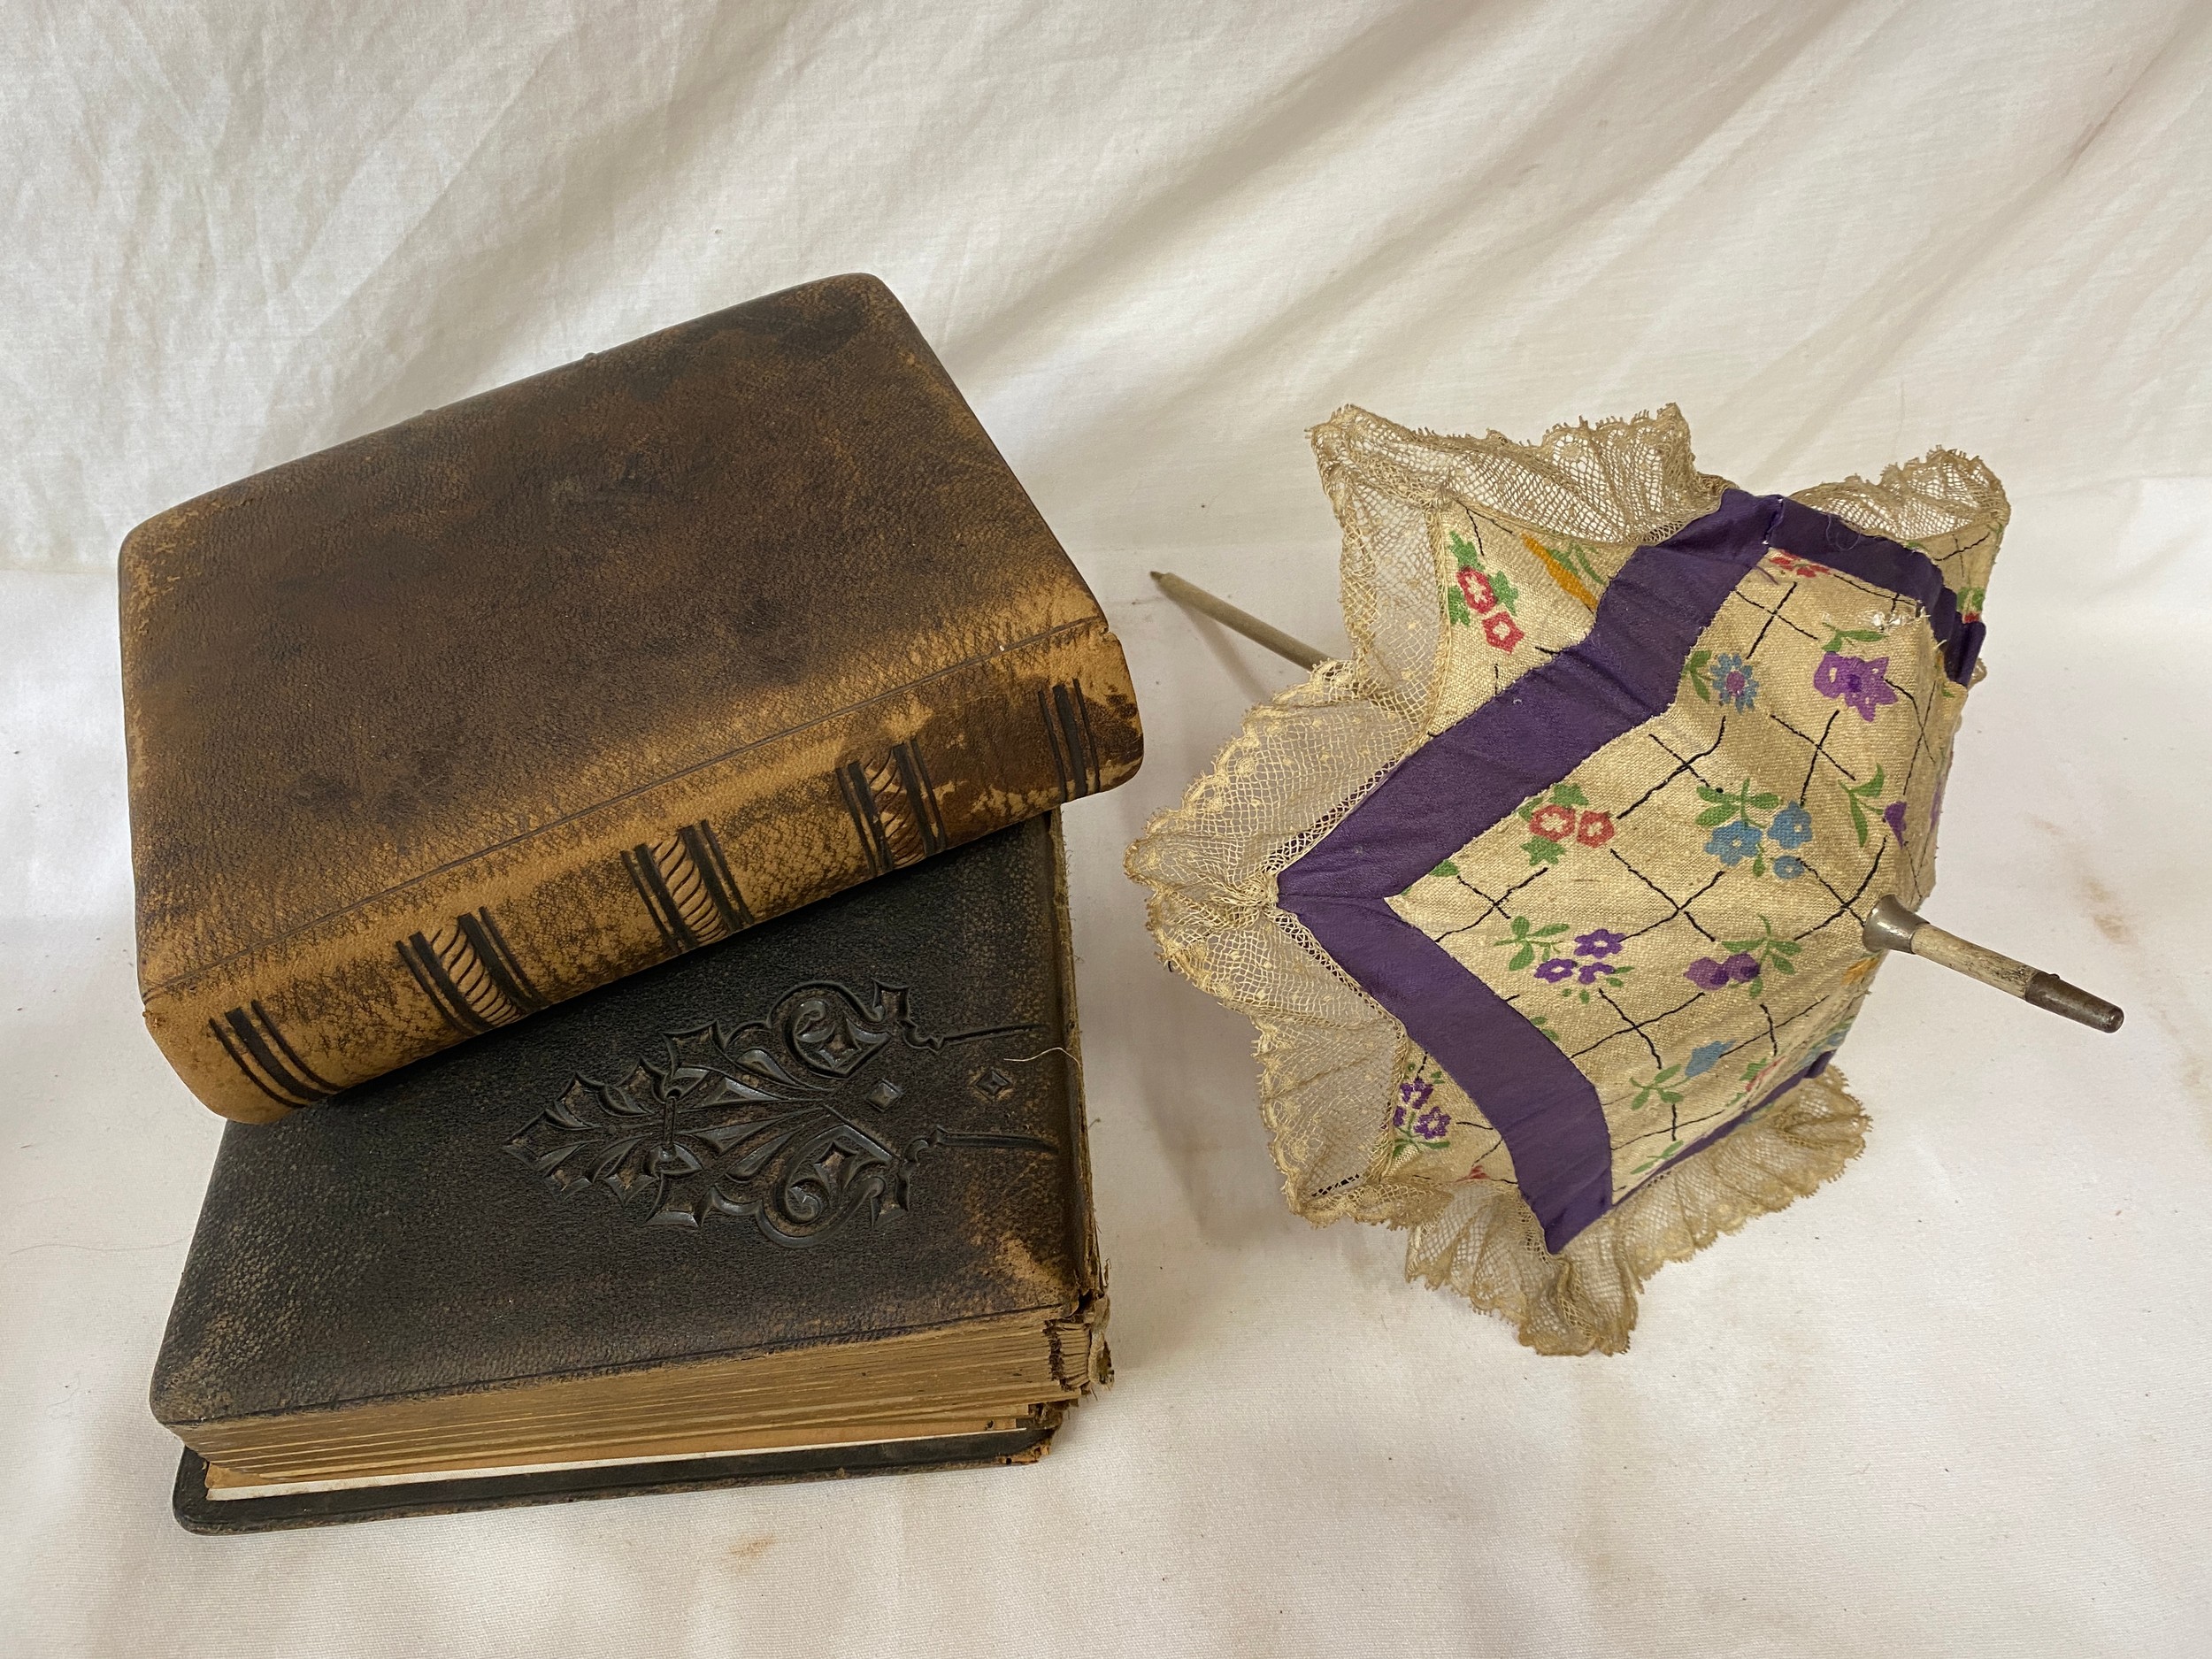 Photograph albums; Saltley College X'mas 1887 presented to Thomas Withers by his fellow students